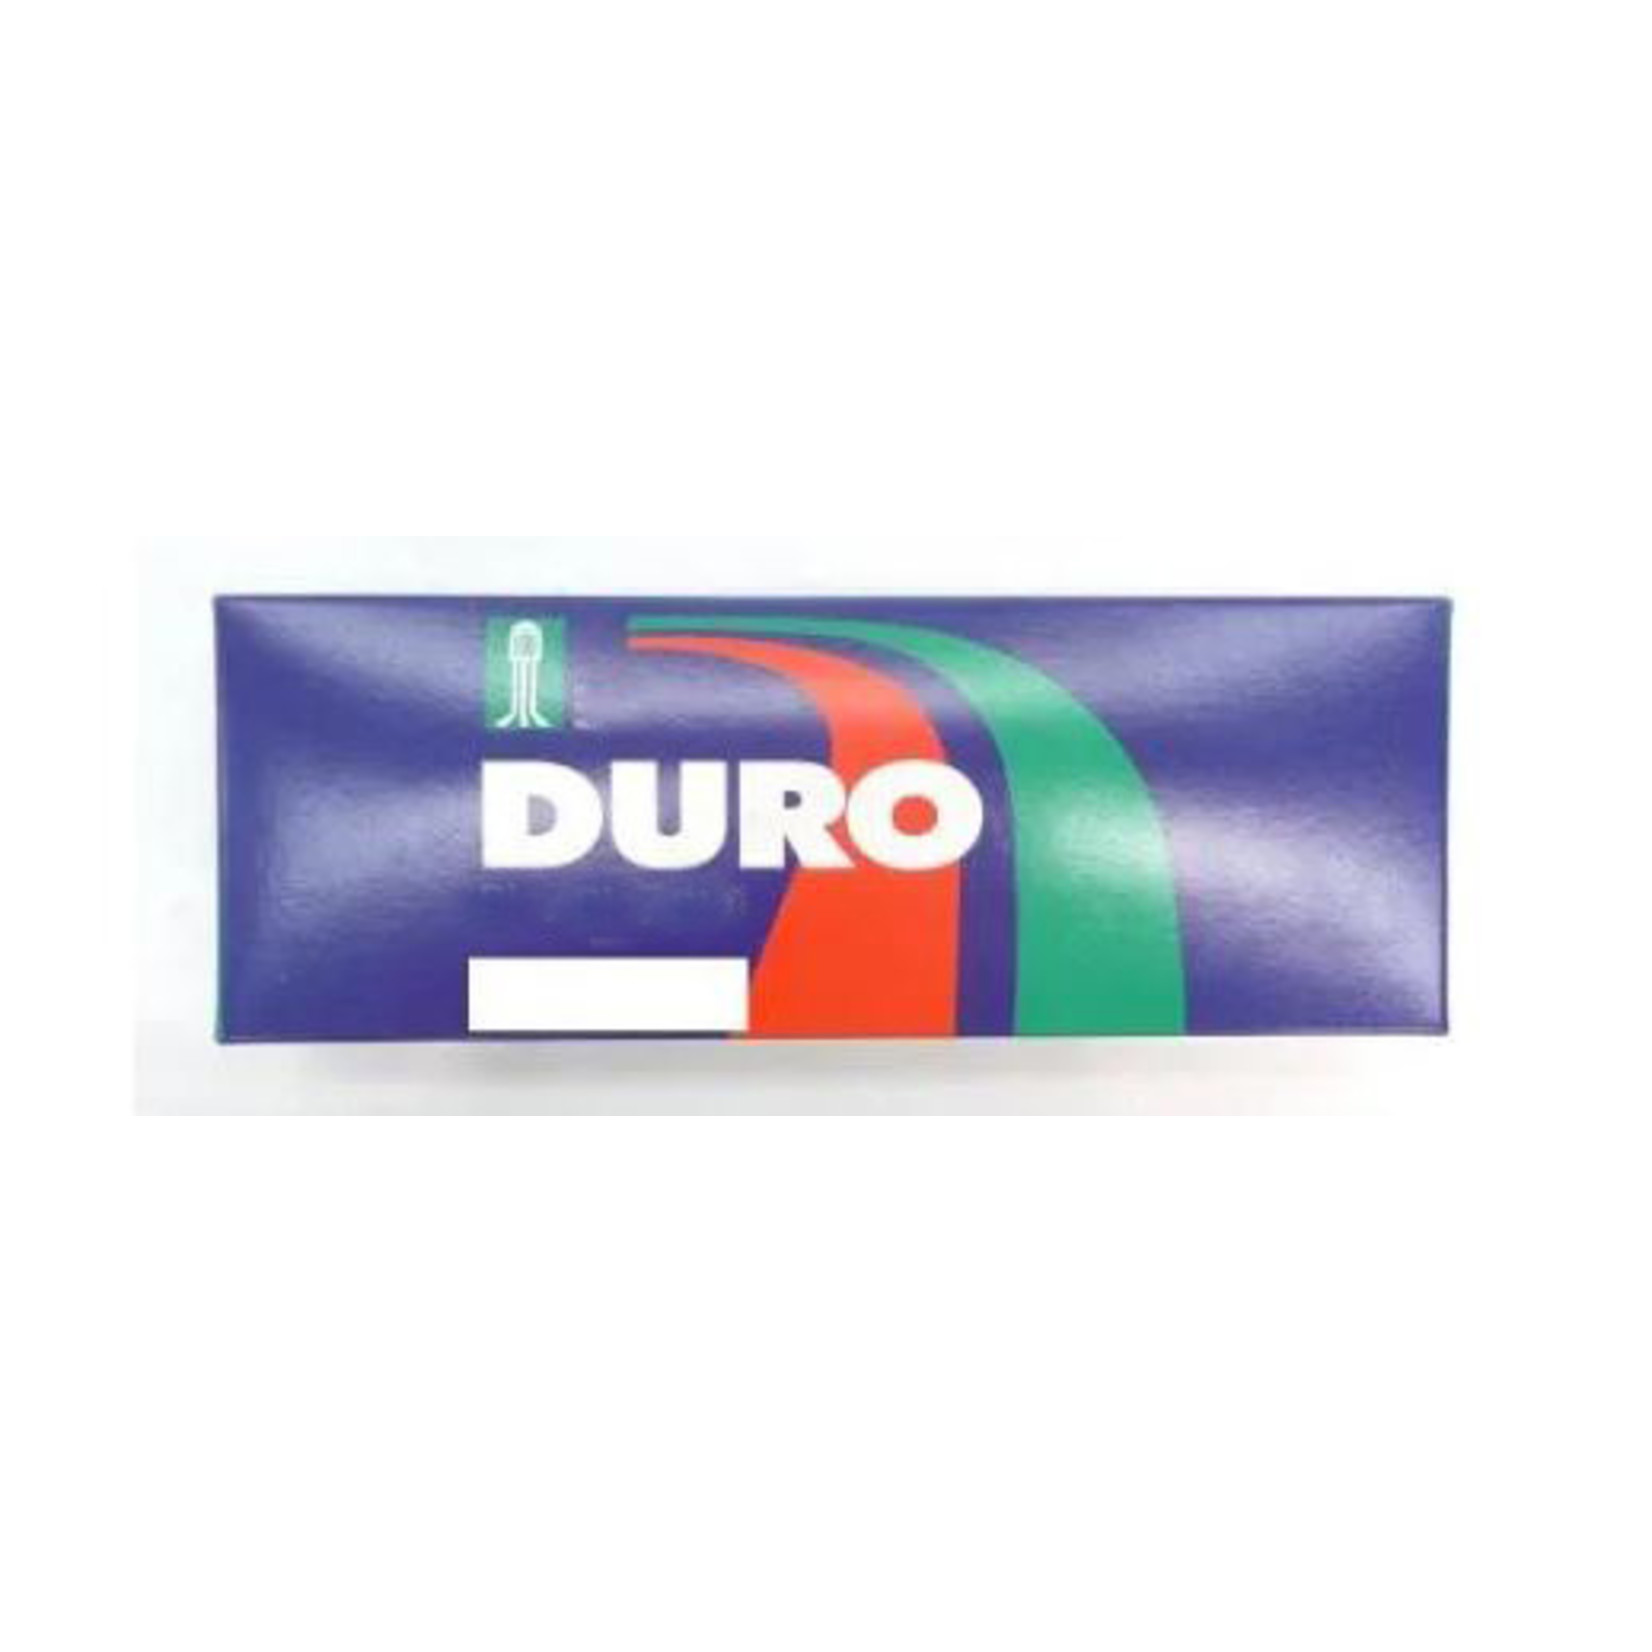 Duro Duro Bicycle Thorn Resistant Tube - 26 X 1.5/1.75 F/V - Pair